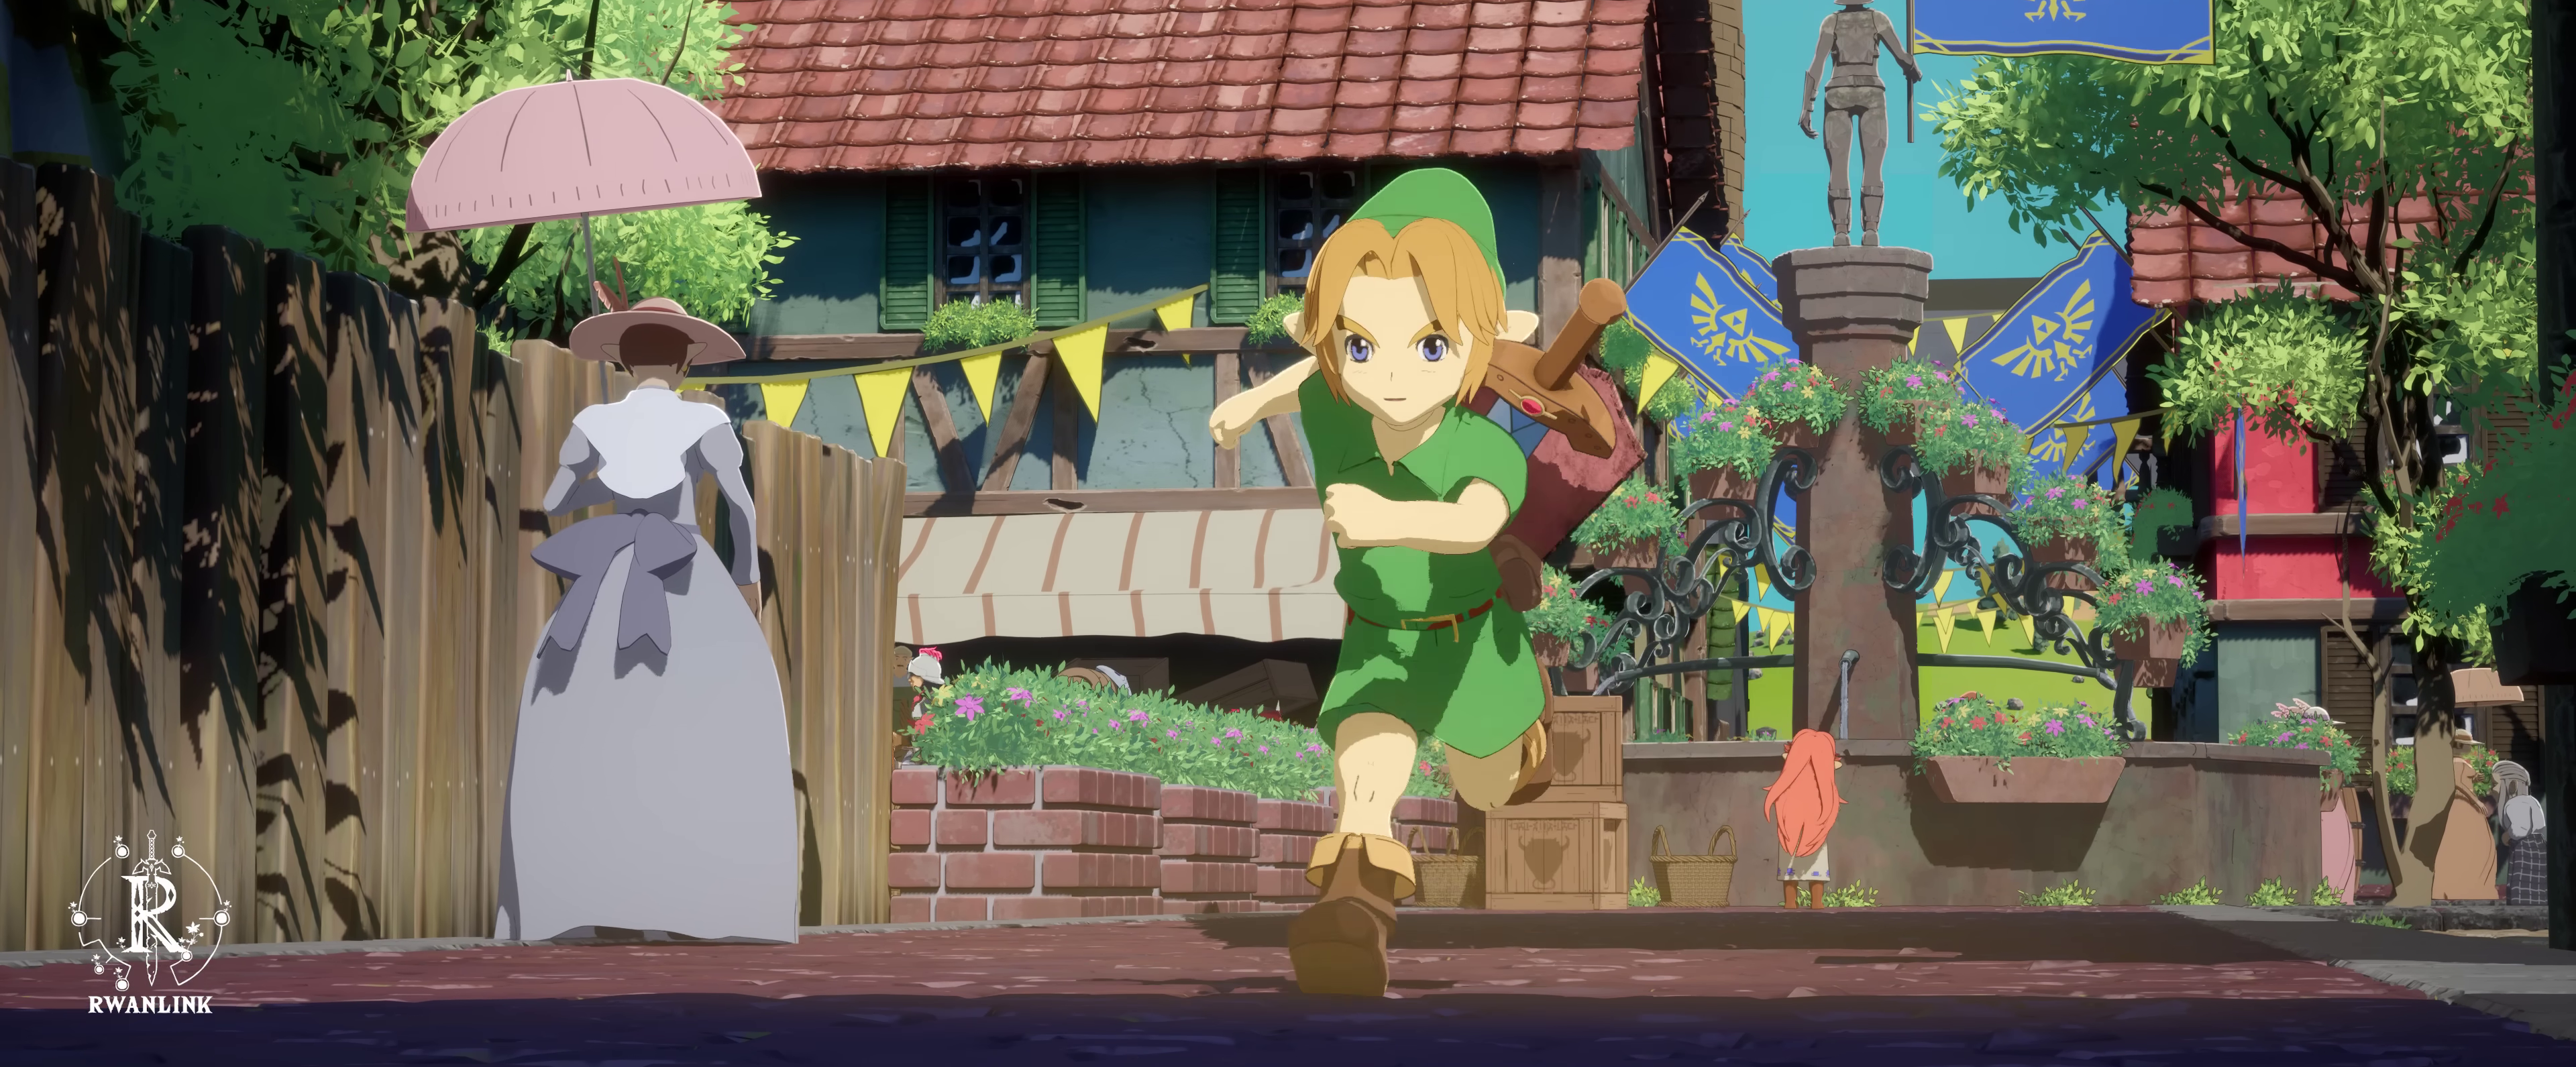 An image of Link running through a town square in a fan-made YouTube animation. 